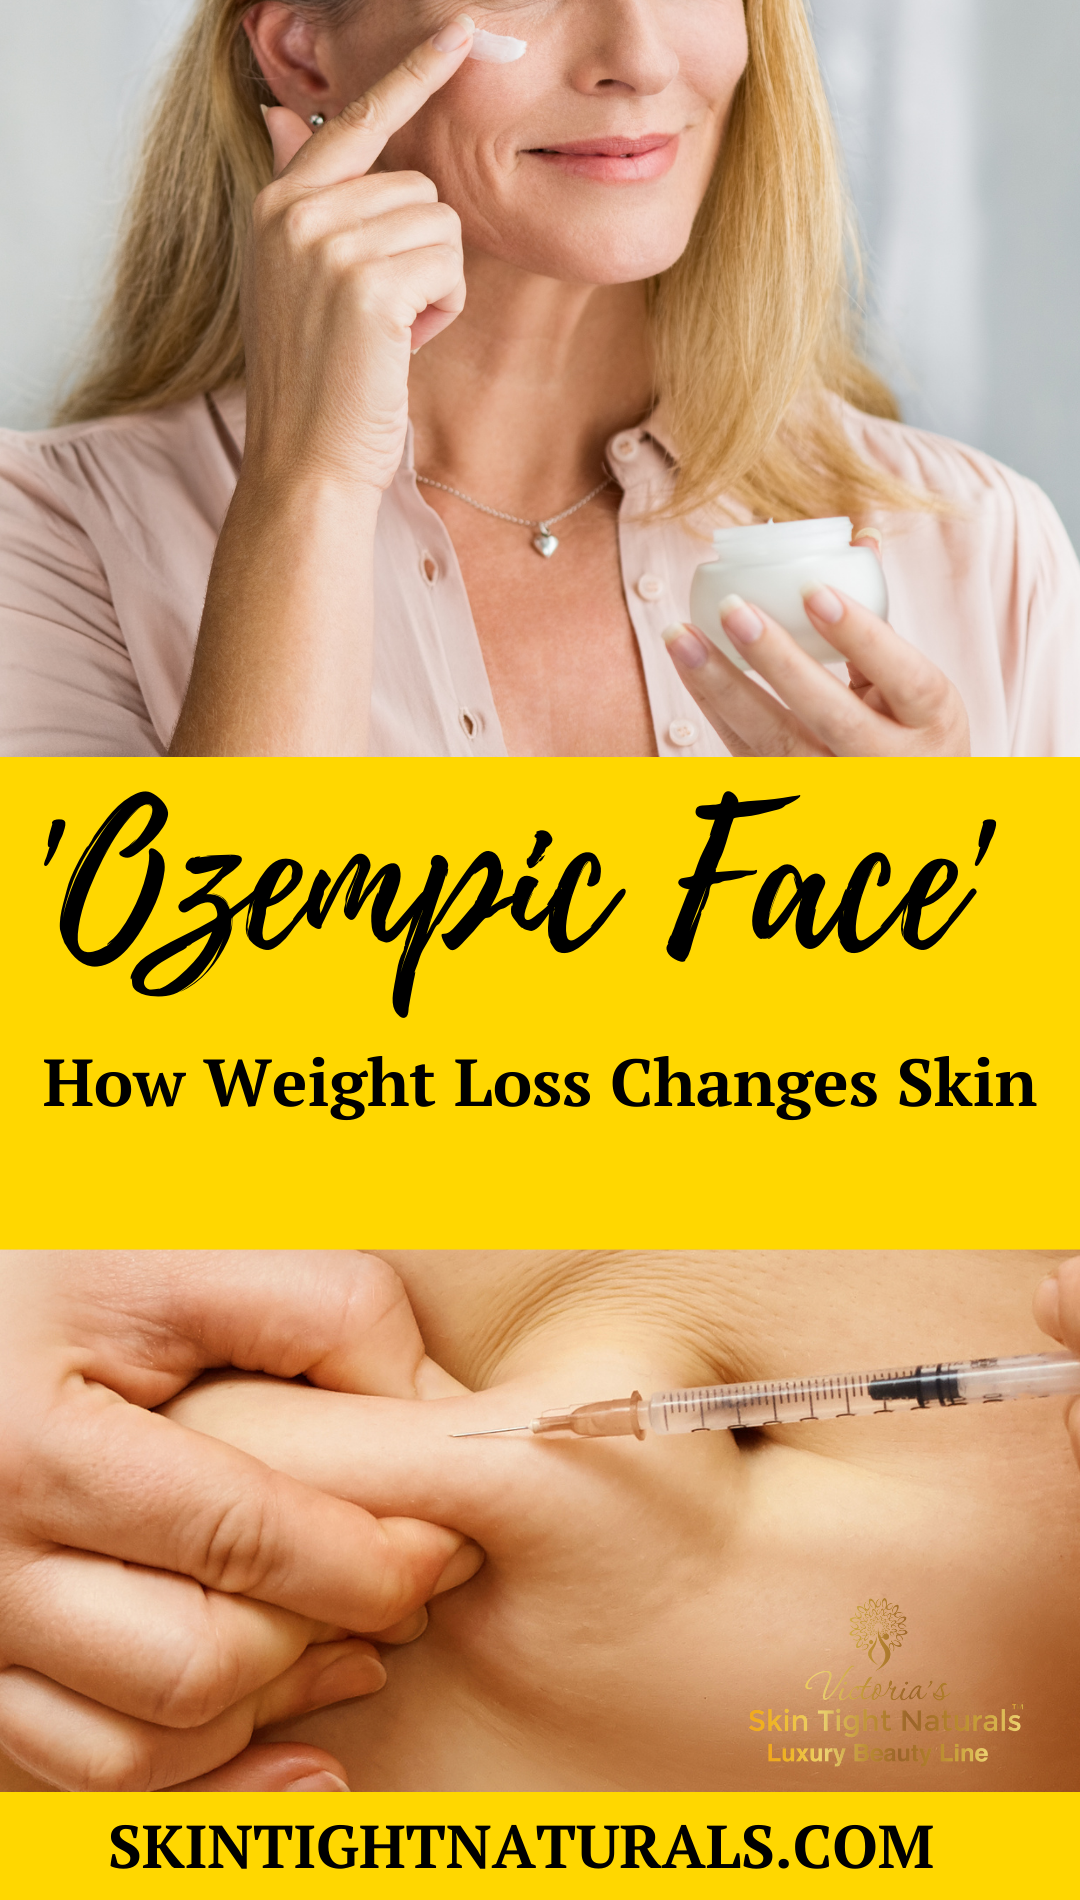 How To Tighten Your Skin During Rapid Weight Loss